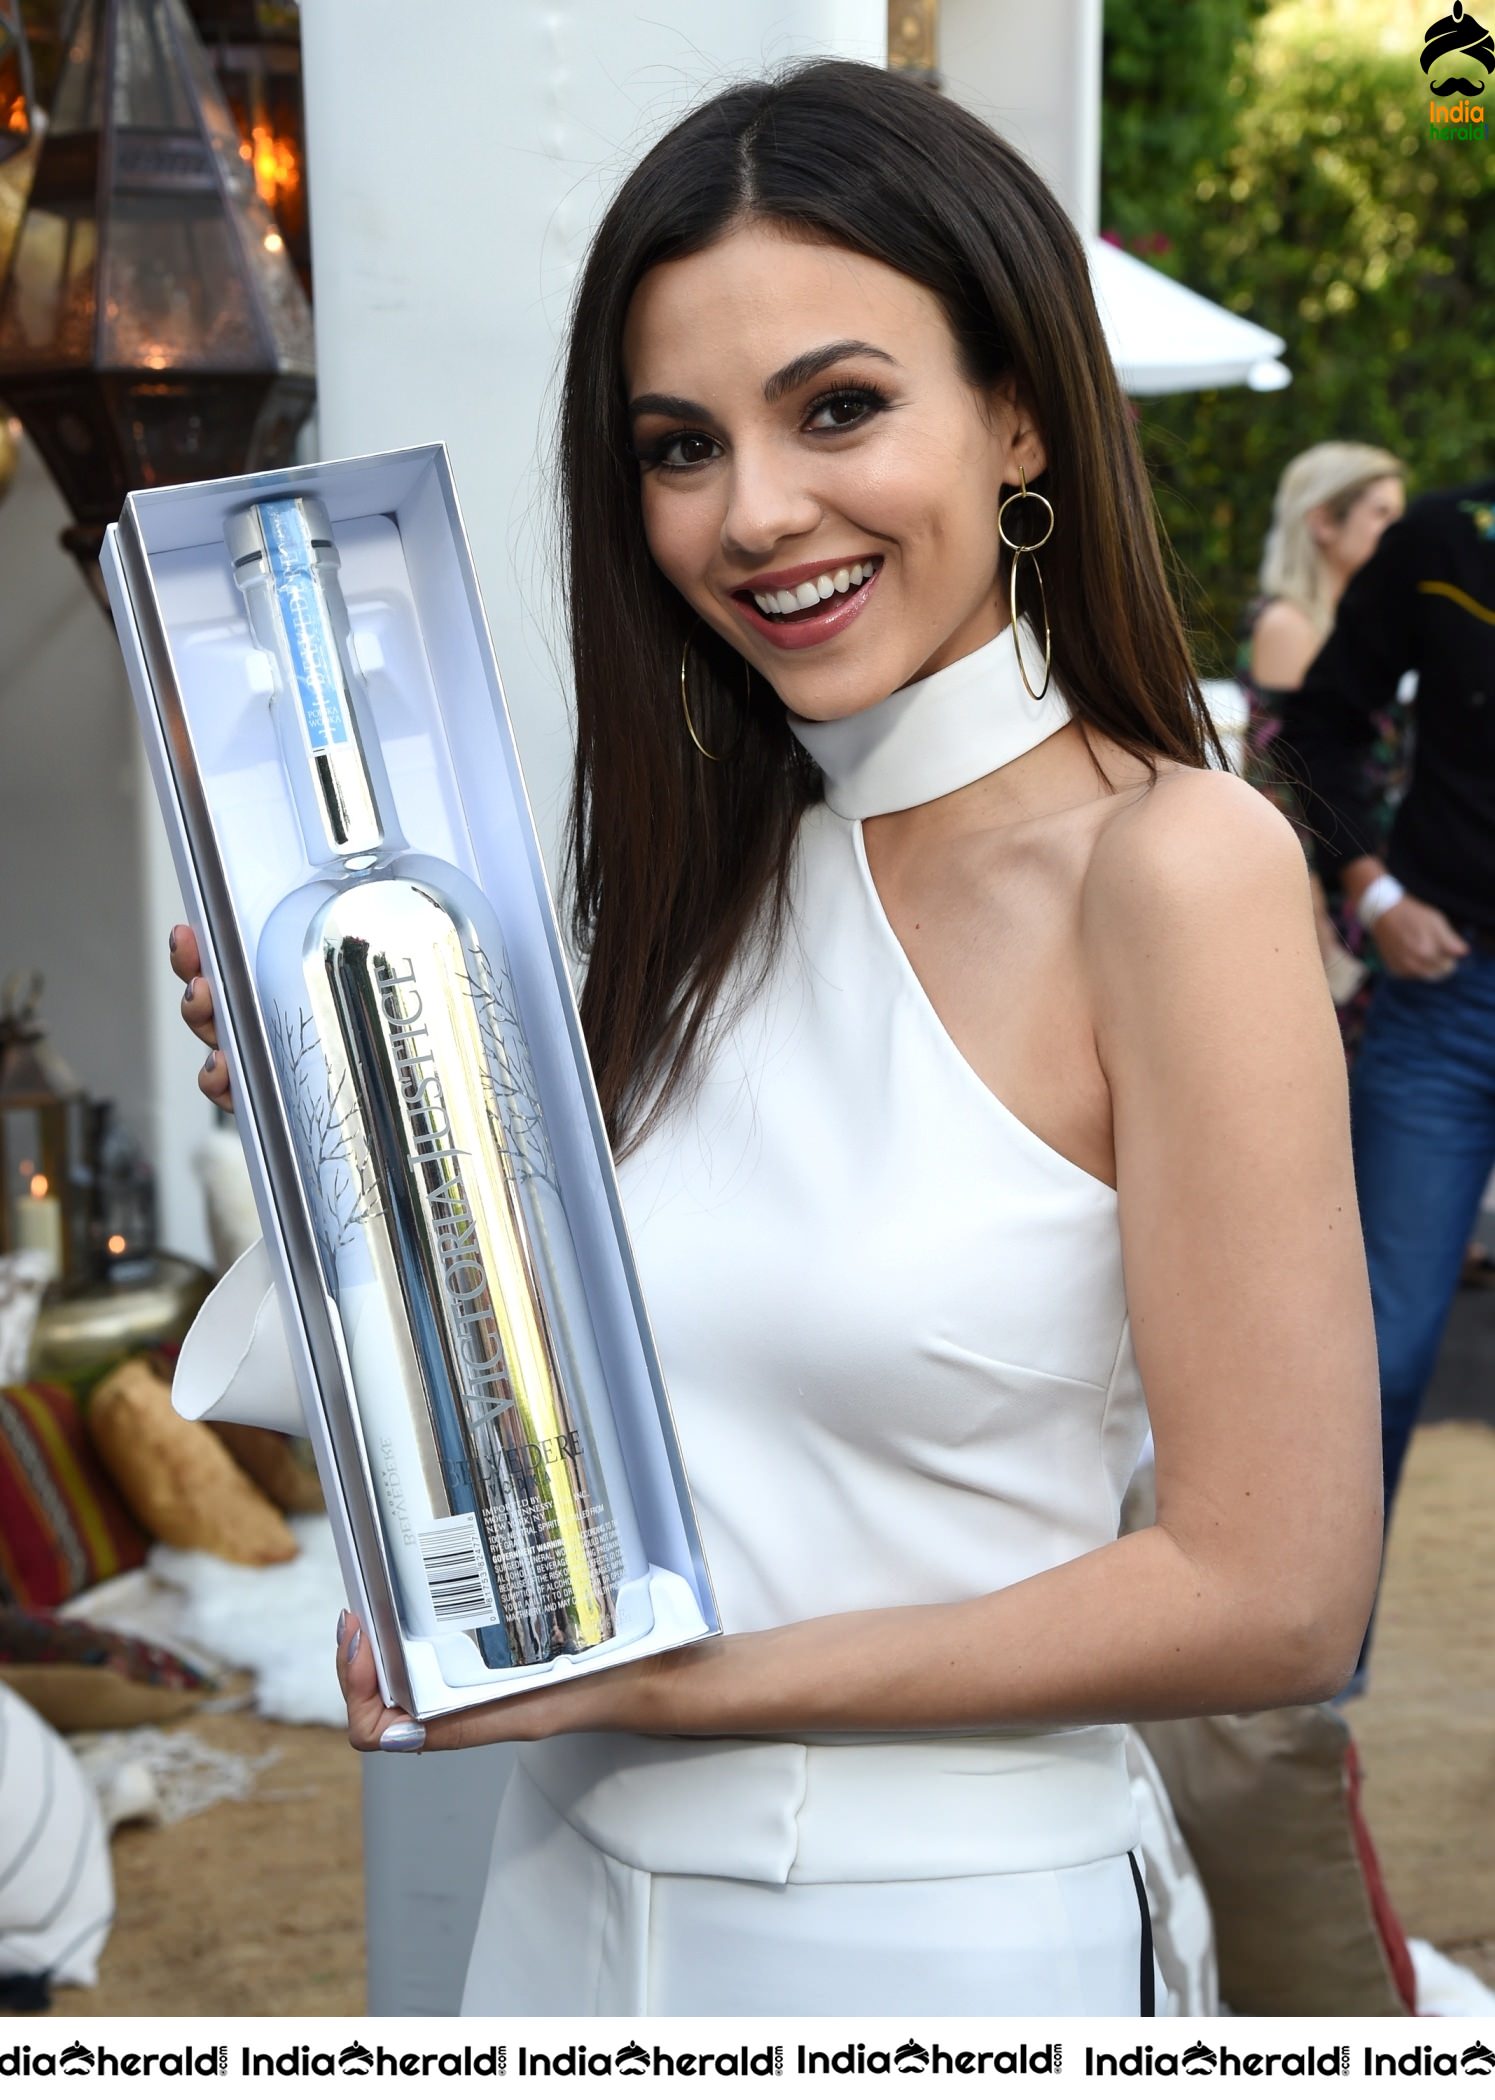 Victoria Justice Enjoying Girls Party and she was seen in White Attire Set 2